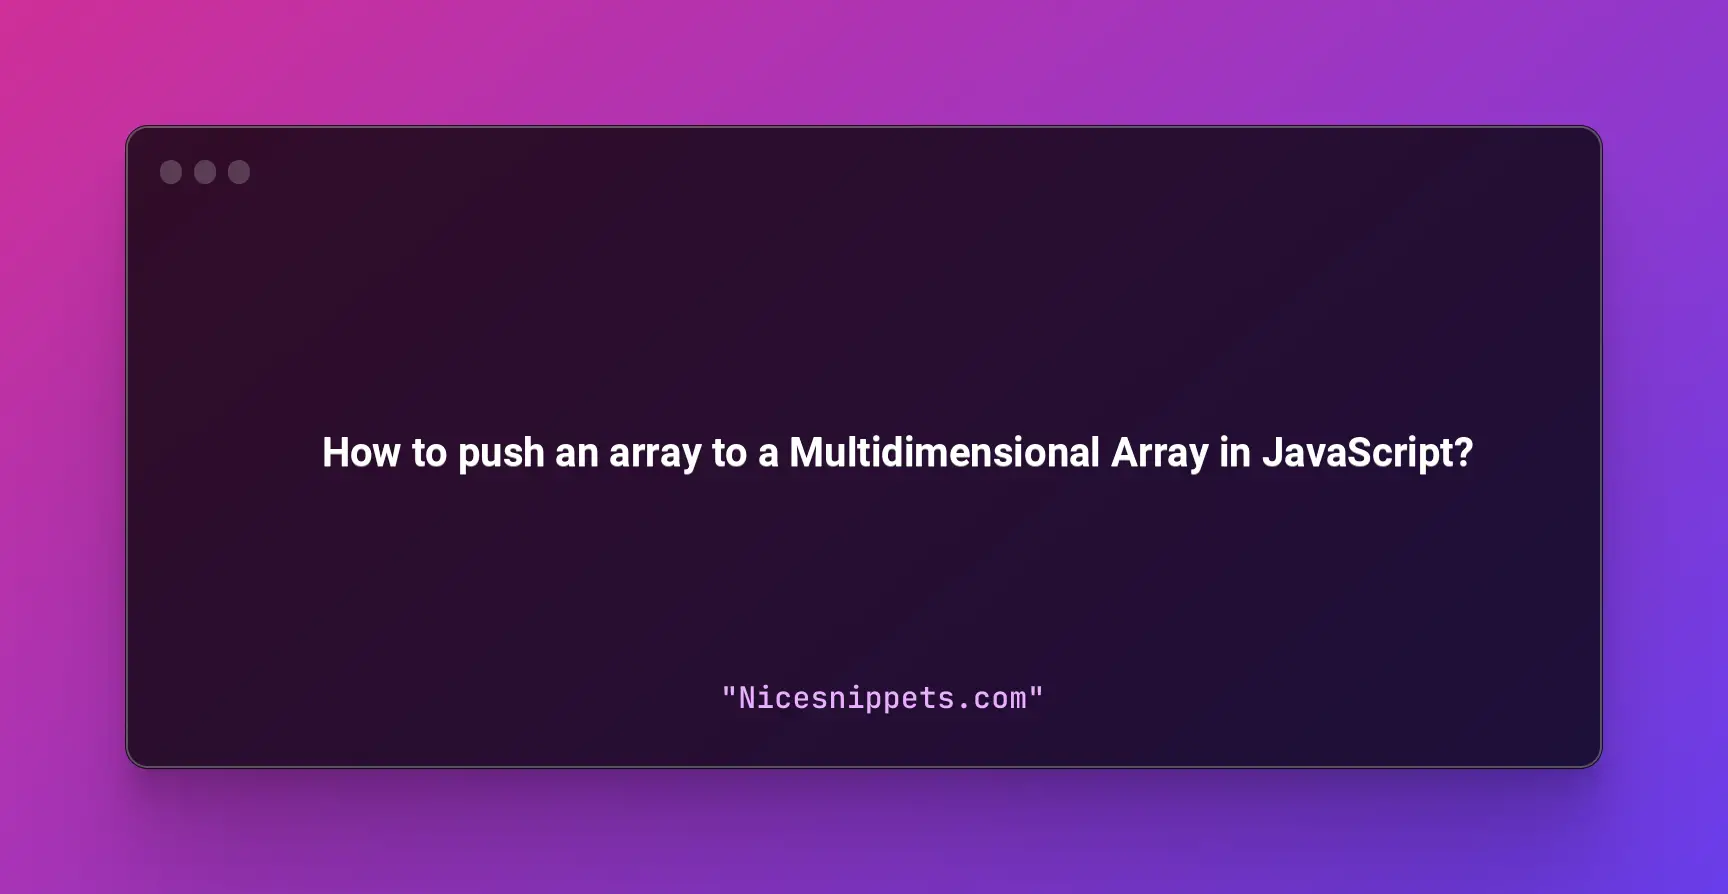 How to push an array to a Multidimensional Array in JavaScript?